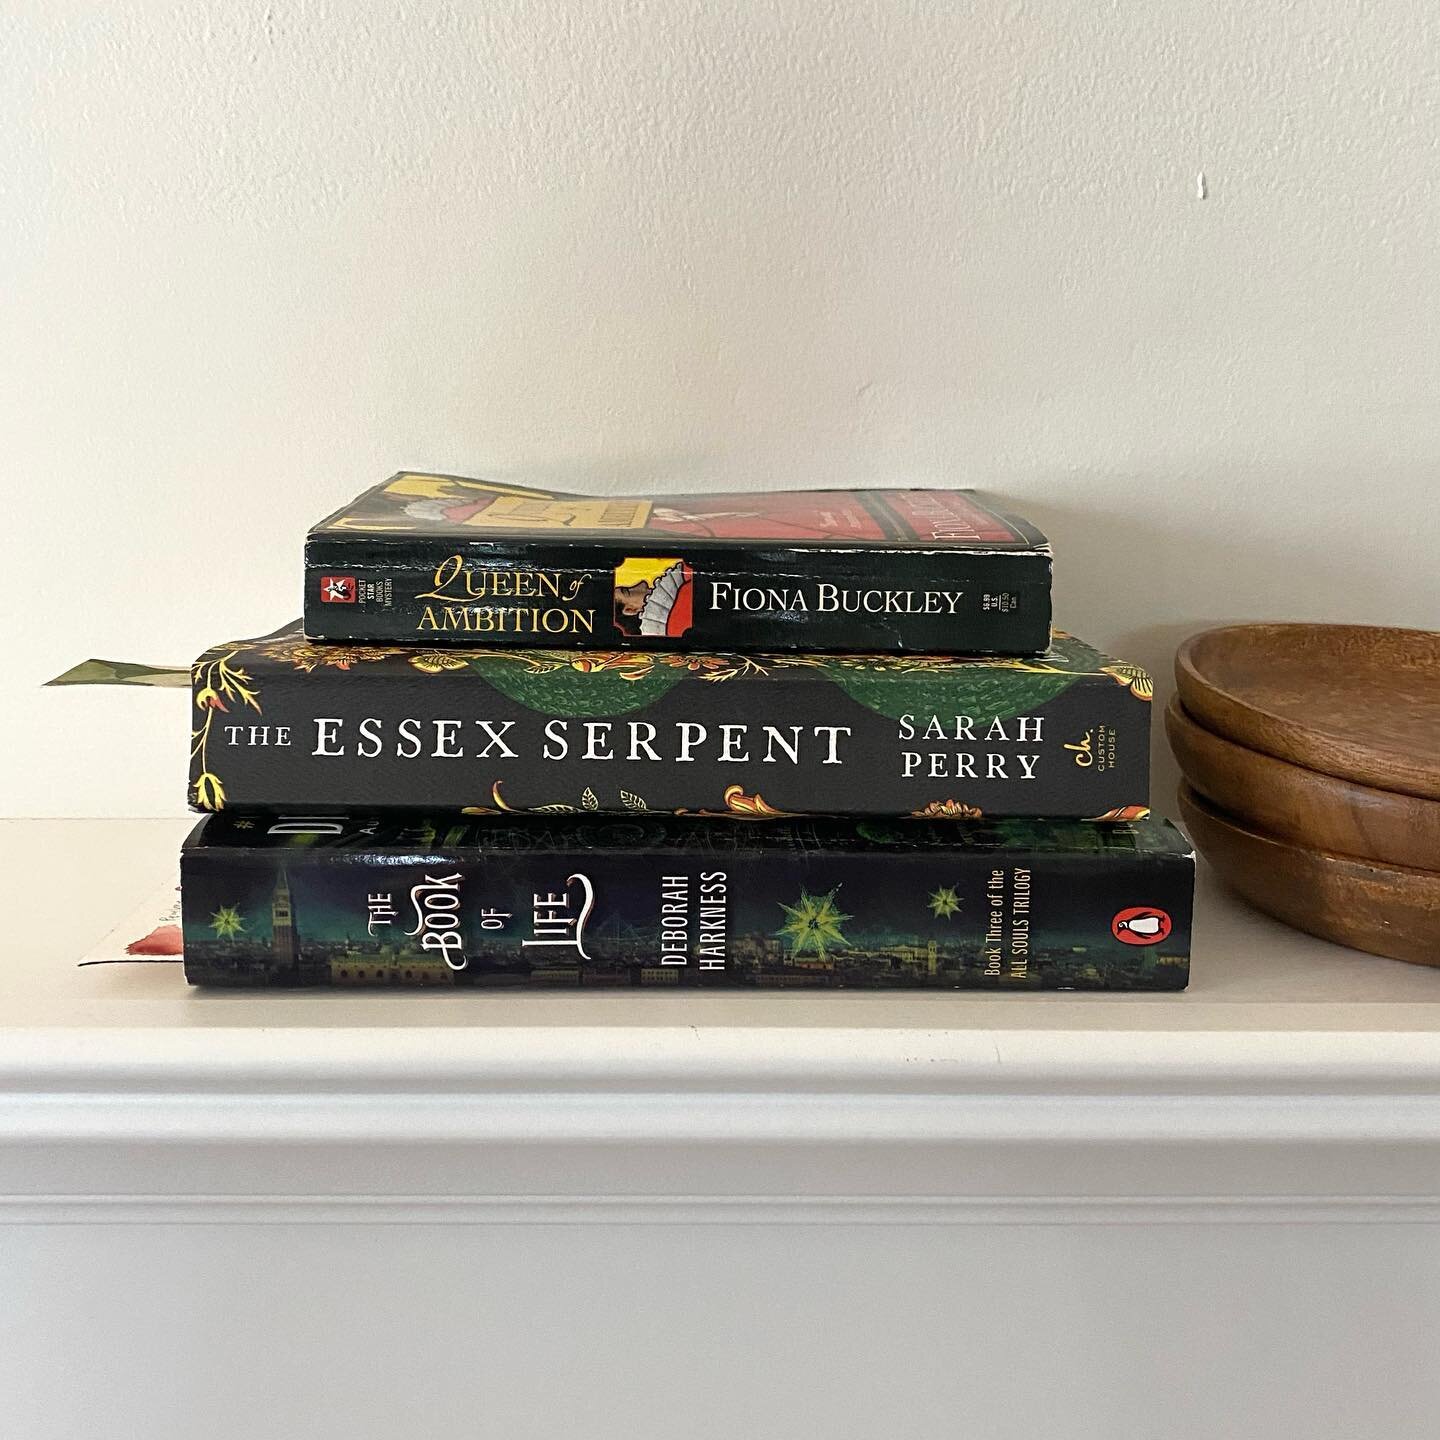 I can&rsquo;t wait to watch The Essex Serpent mini series with Tom Hiddleston. Have you read the book? These are the three books I read in May. Any suggestions for June reading? I&rsquo;d love to hear.